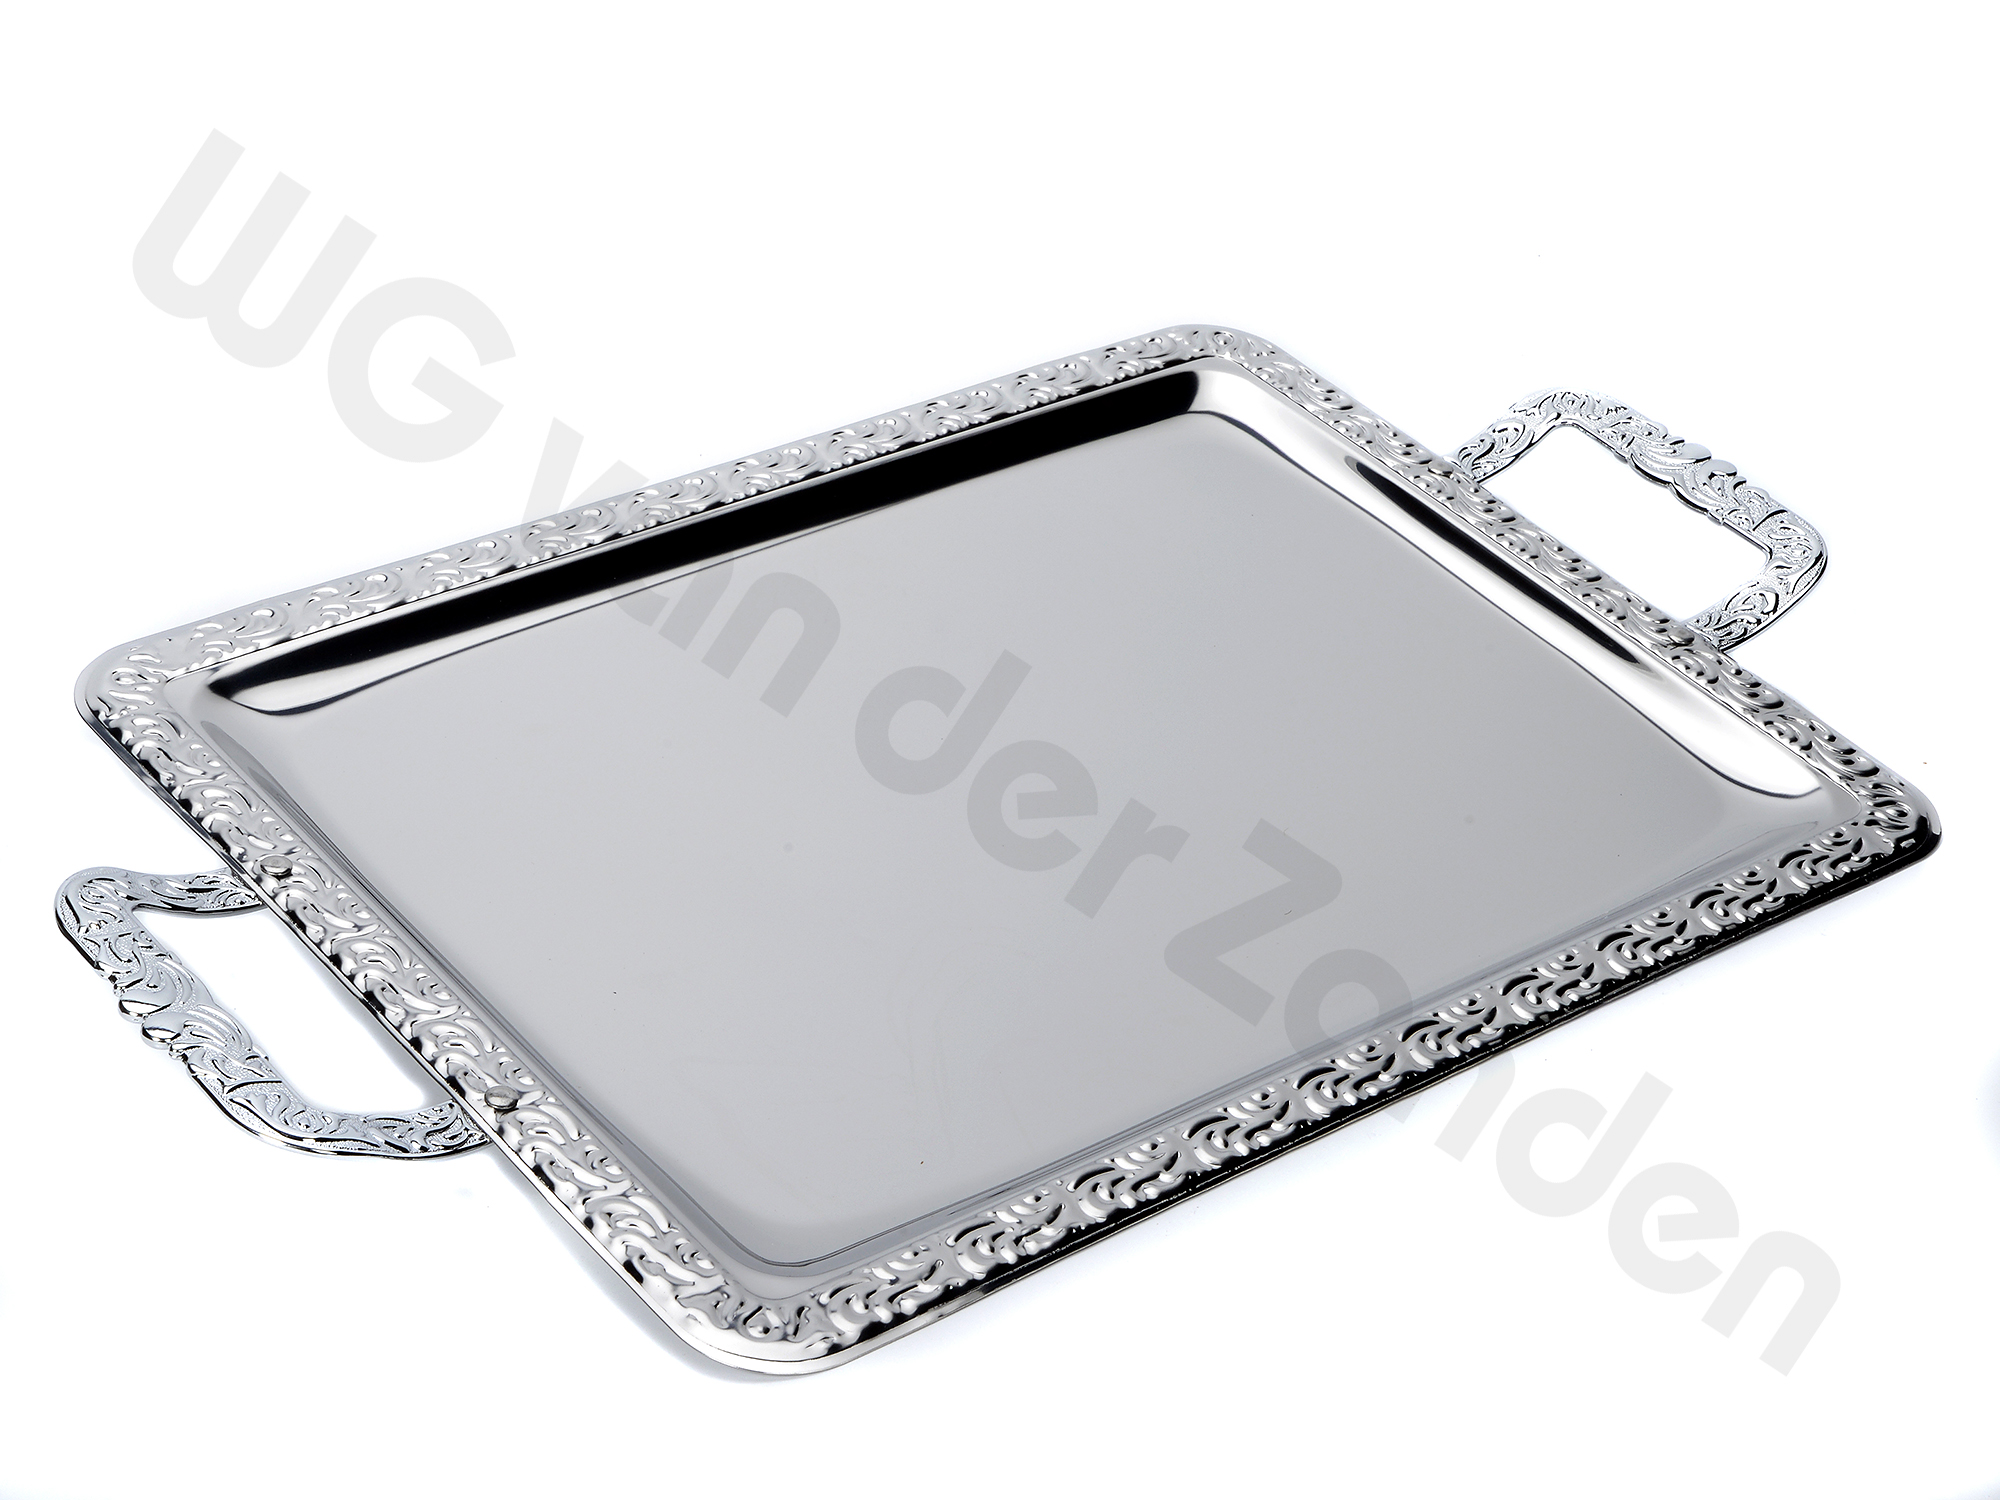 257153 SERVING TRAY S/S 60X36CM HANDLED